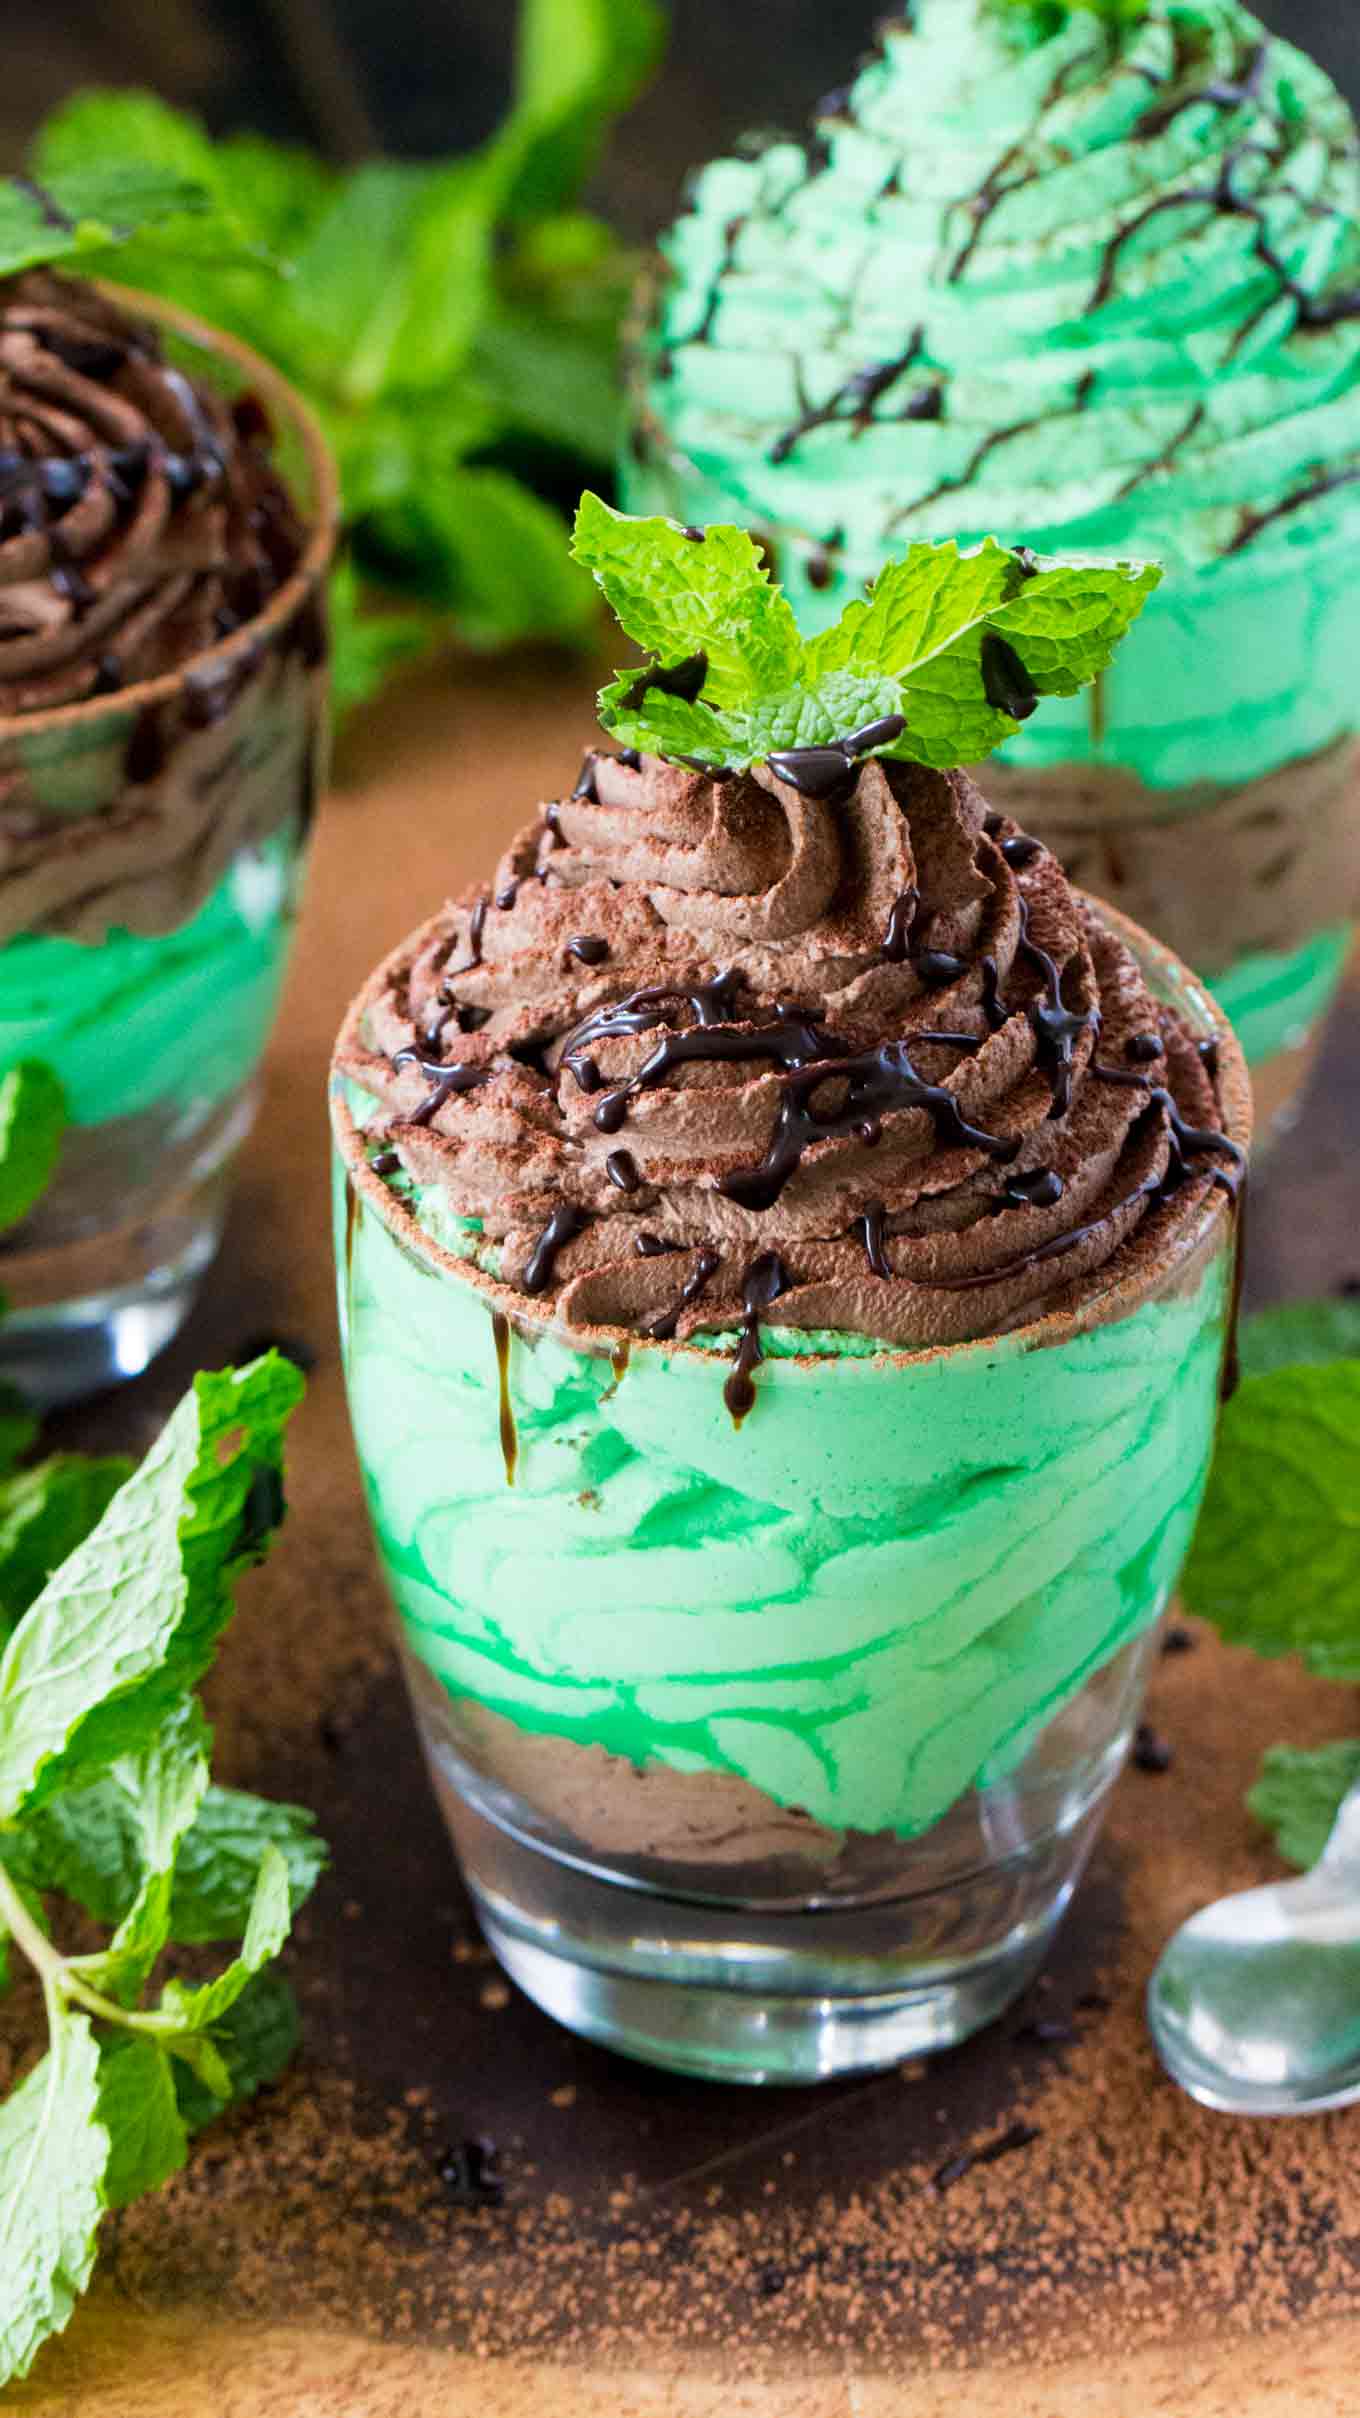 No Bake Chocolate Mint Mousse made with just a few ingredients is a flavorful and creamy take on the classic, more labor intensive mousse.